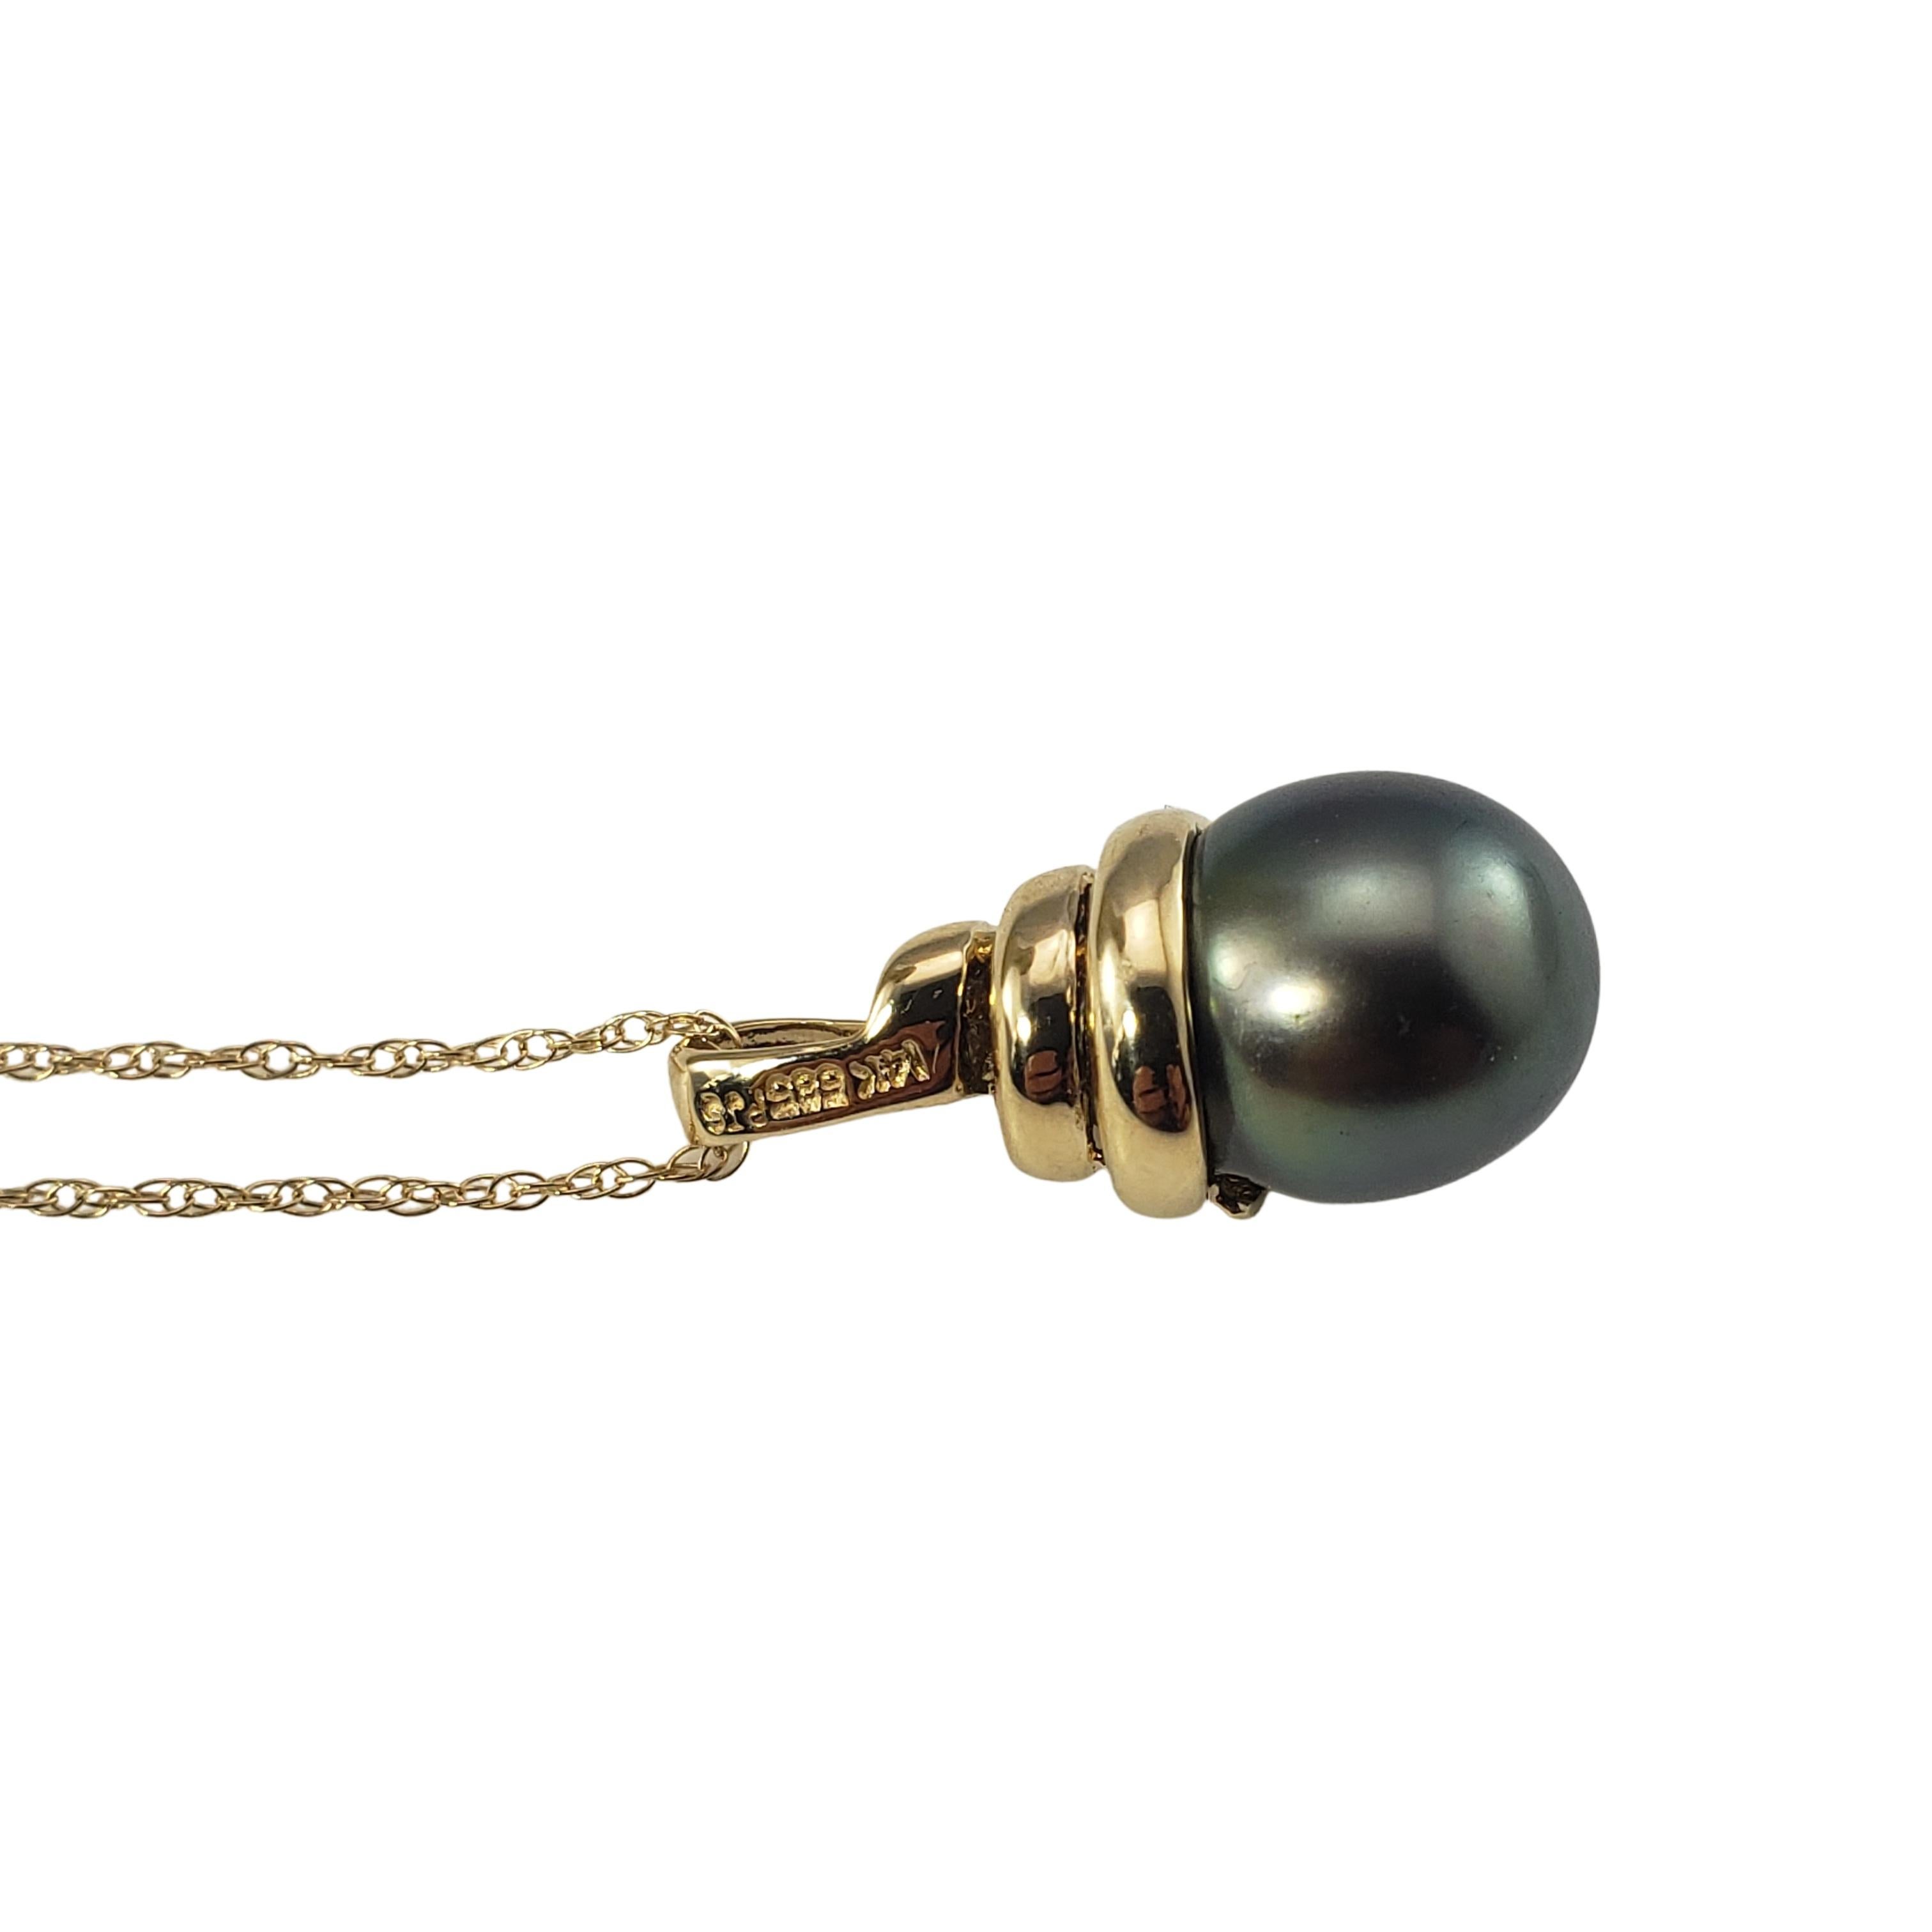 Vintage 14 Karat Yellow Gold Black Pearl and Diamond Pendant Necklace-

This lovely pendant features one black pearl (9 mm) and four round single cut diamonds set in classic 14K yellow gold. Suspends from a classic yellow gold necklace.

Approximate